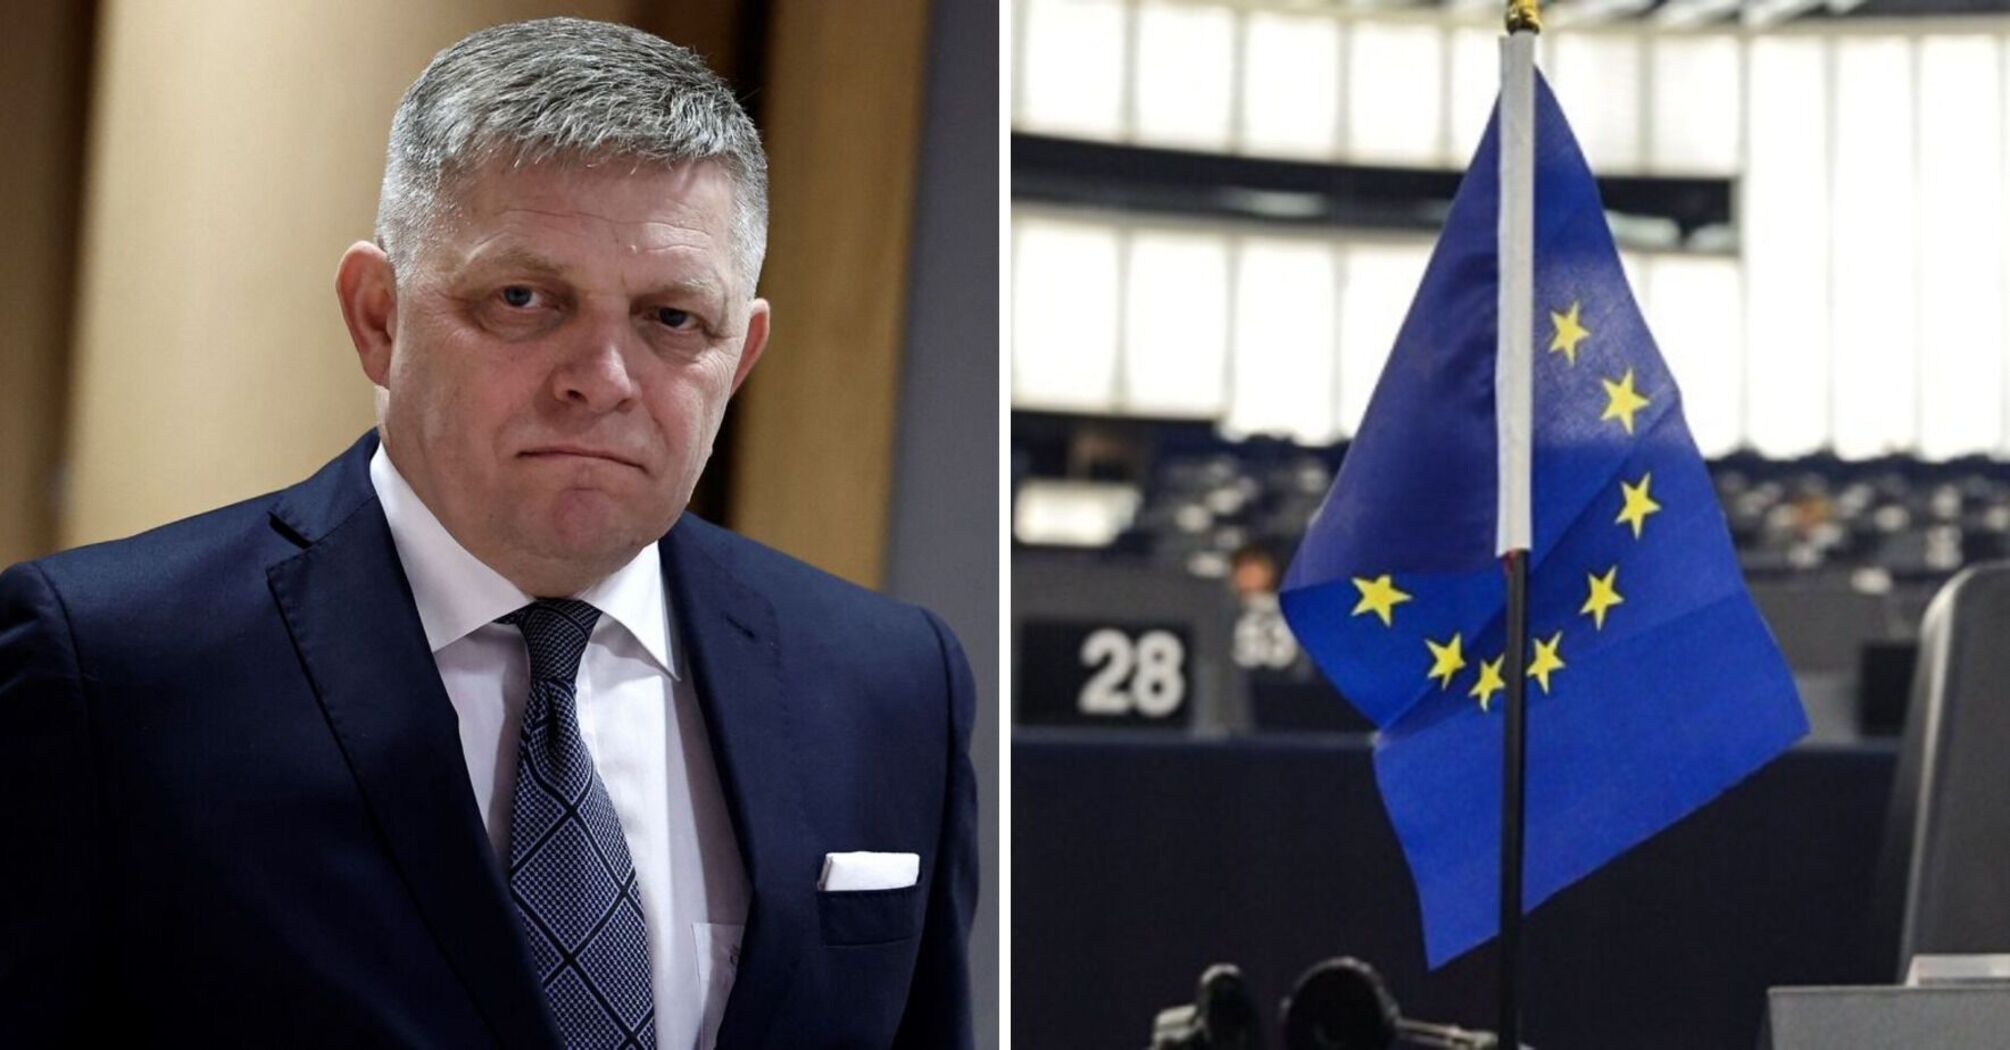 Fico's party, which criticized aid to Ukraine, lost the elections to the European Parliament: details